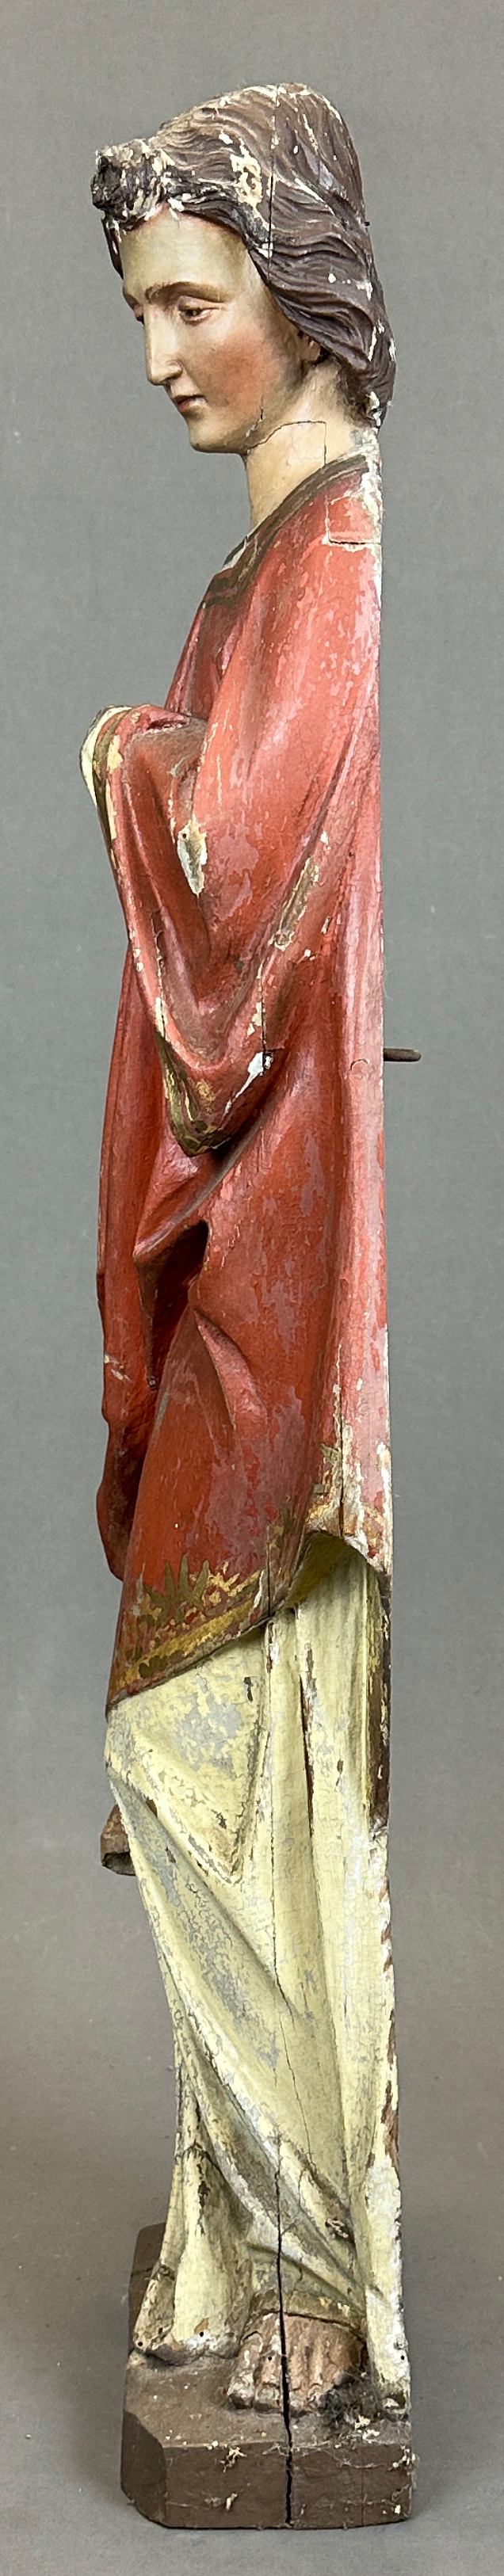 Wooden figure. St Nepomuk. 1st half of the 19th century. Germany. - Image 3 of 13